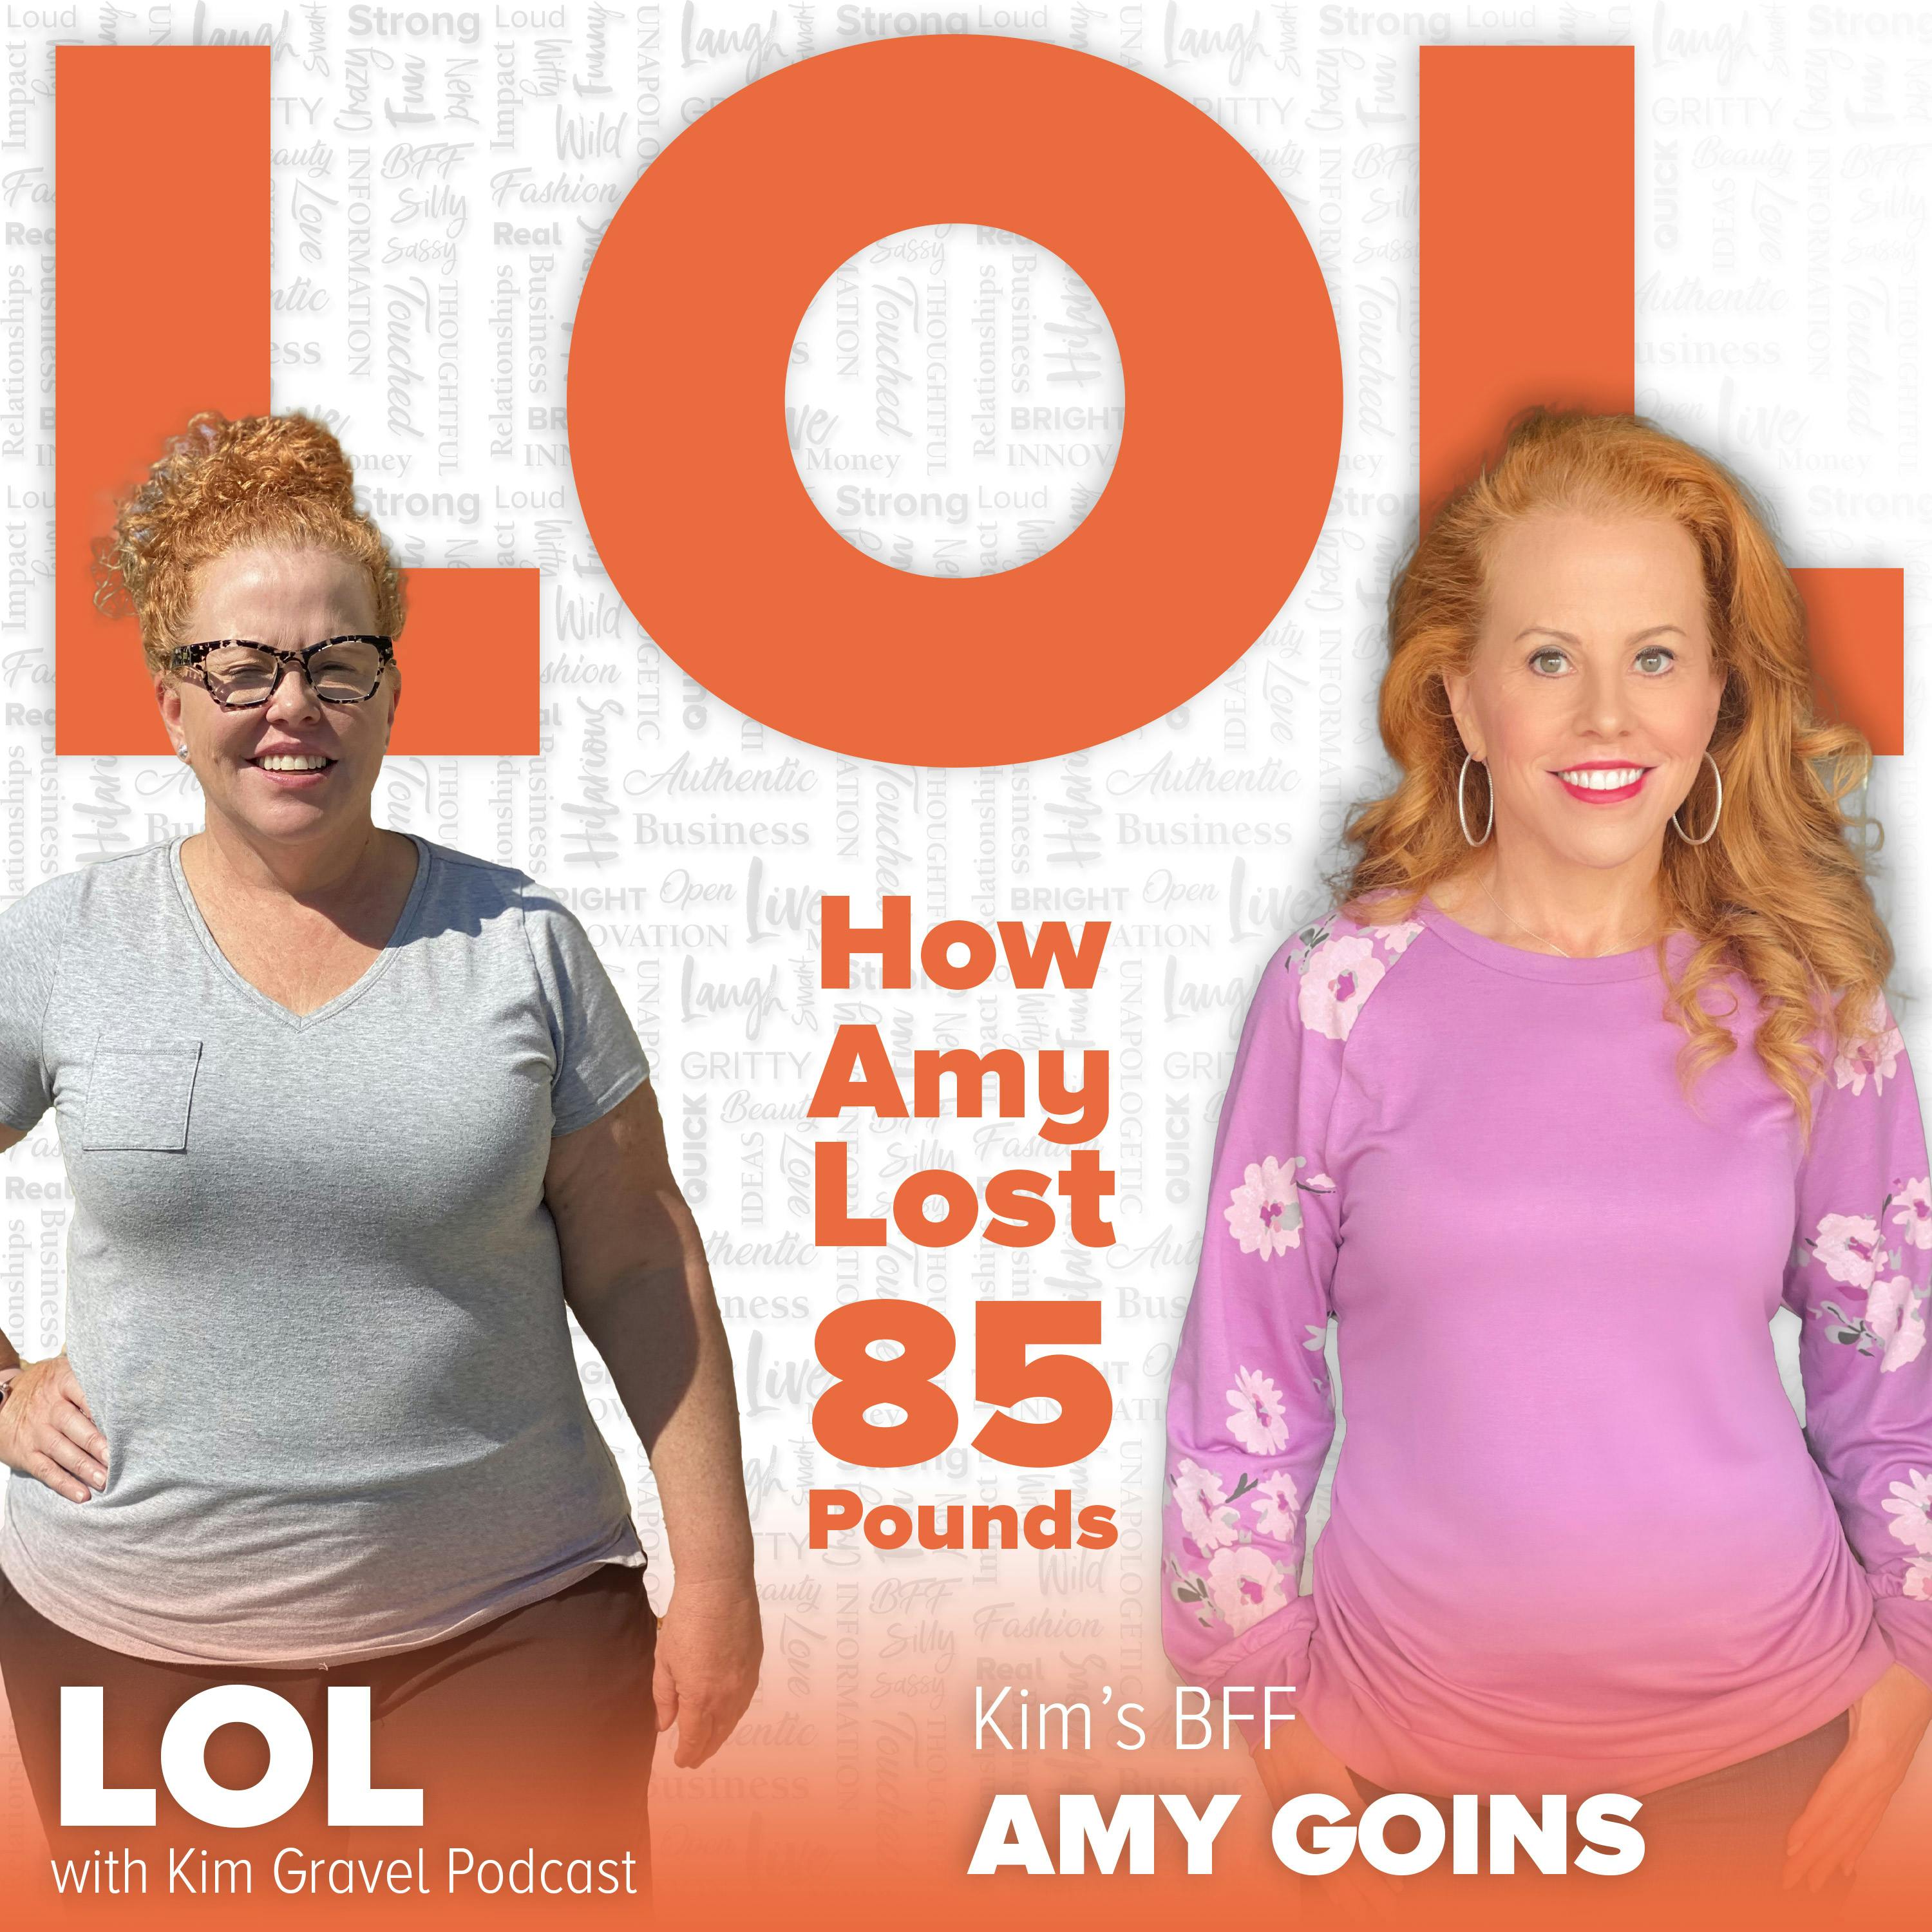 How Amy Lost 85 Pounds with Amy Goins Image